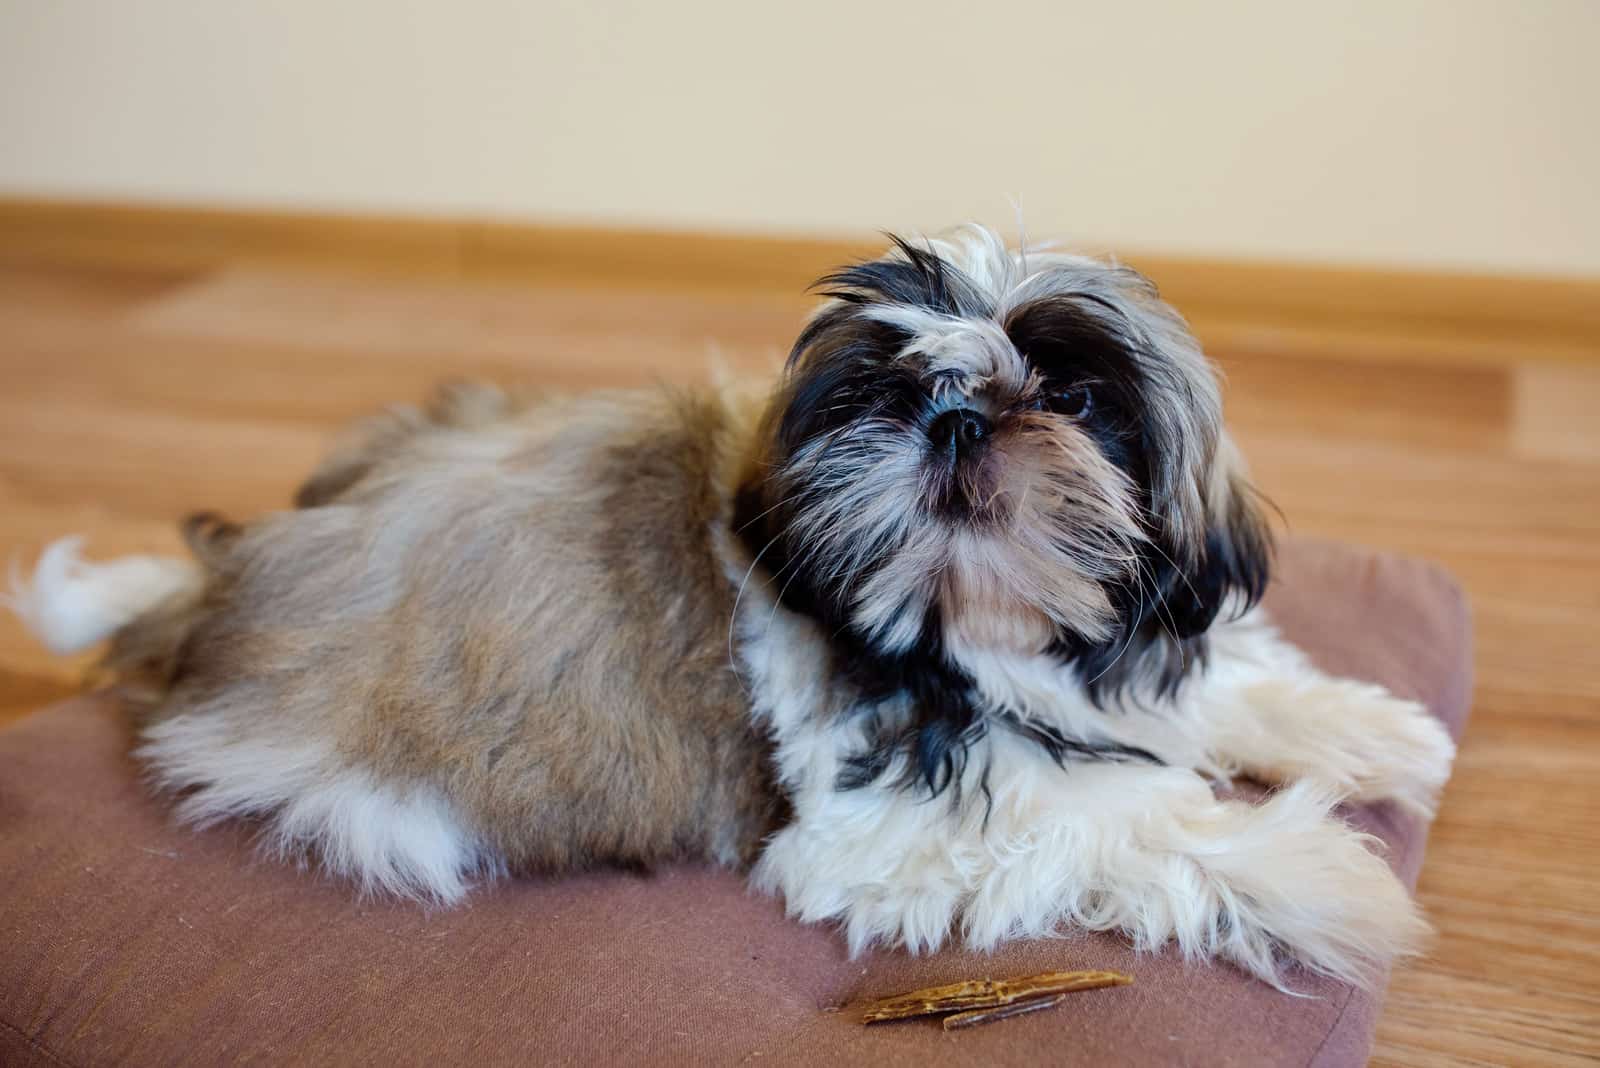 Shih Tzu is lying on his pillow